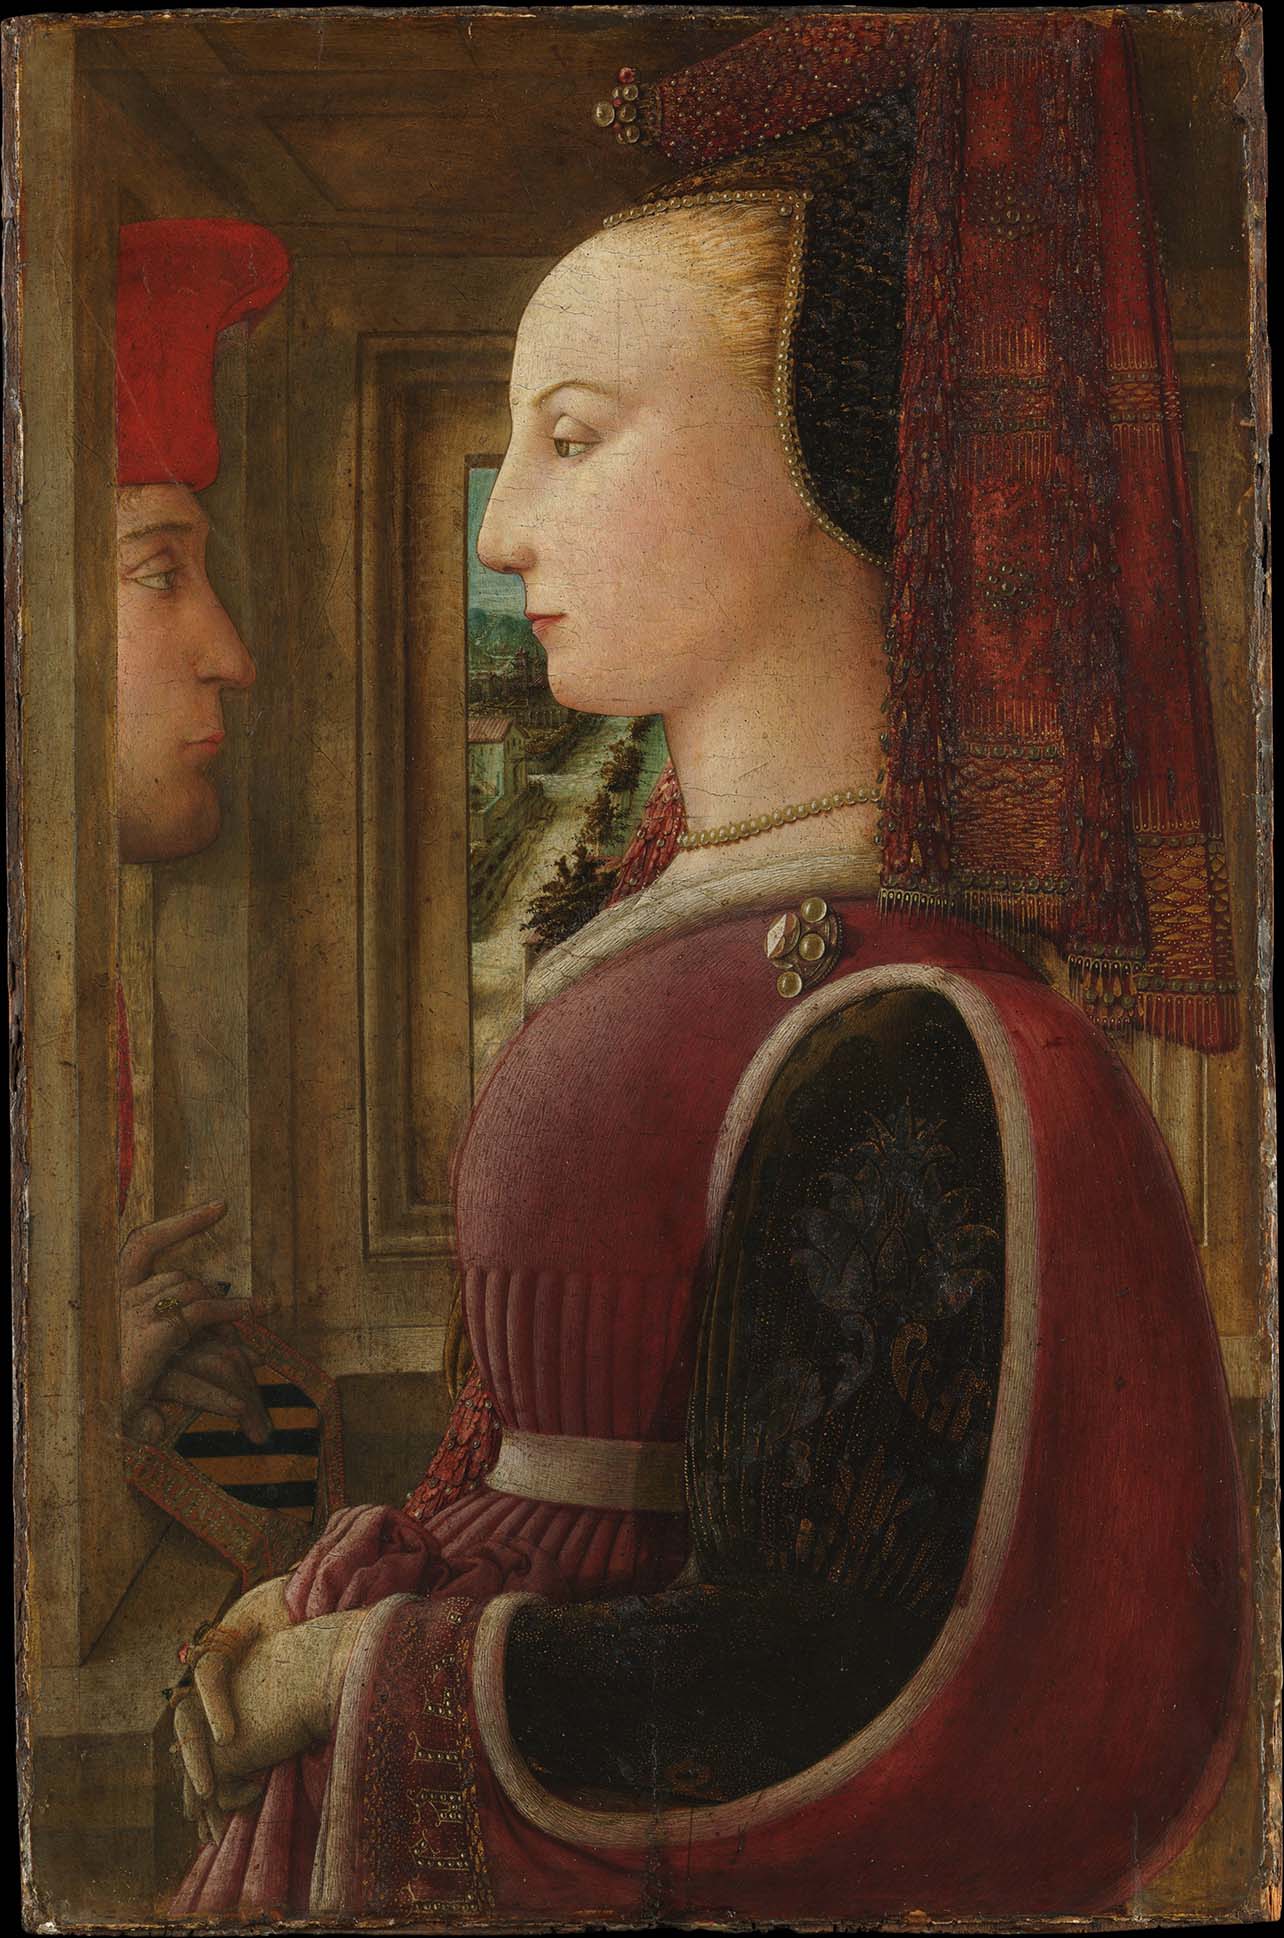 The original Portrait of a Woman with a Man at a Casement by Fra Filippo Lippi